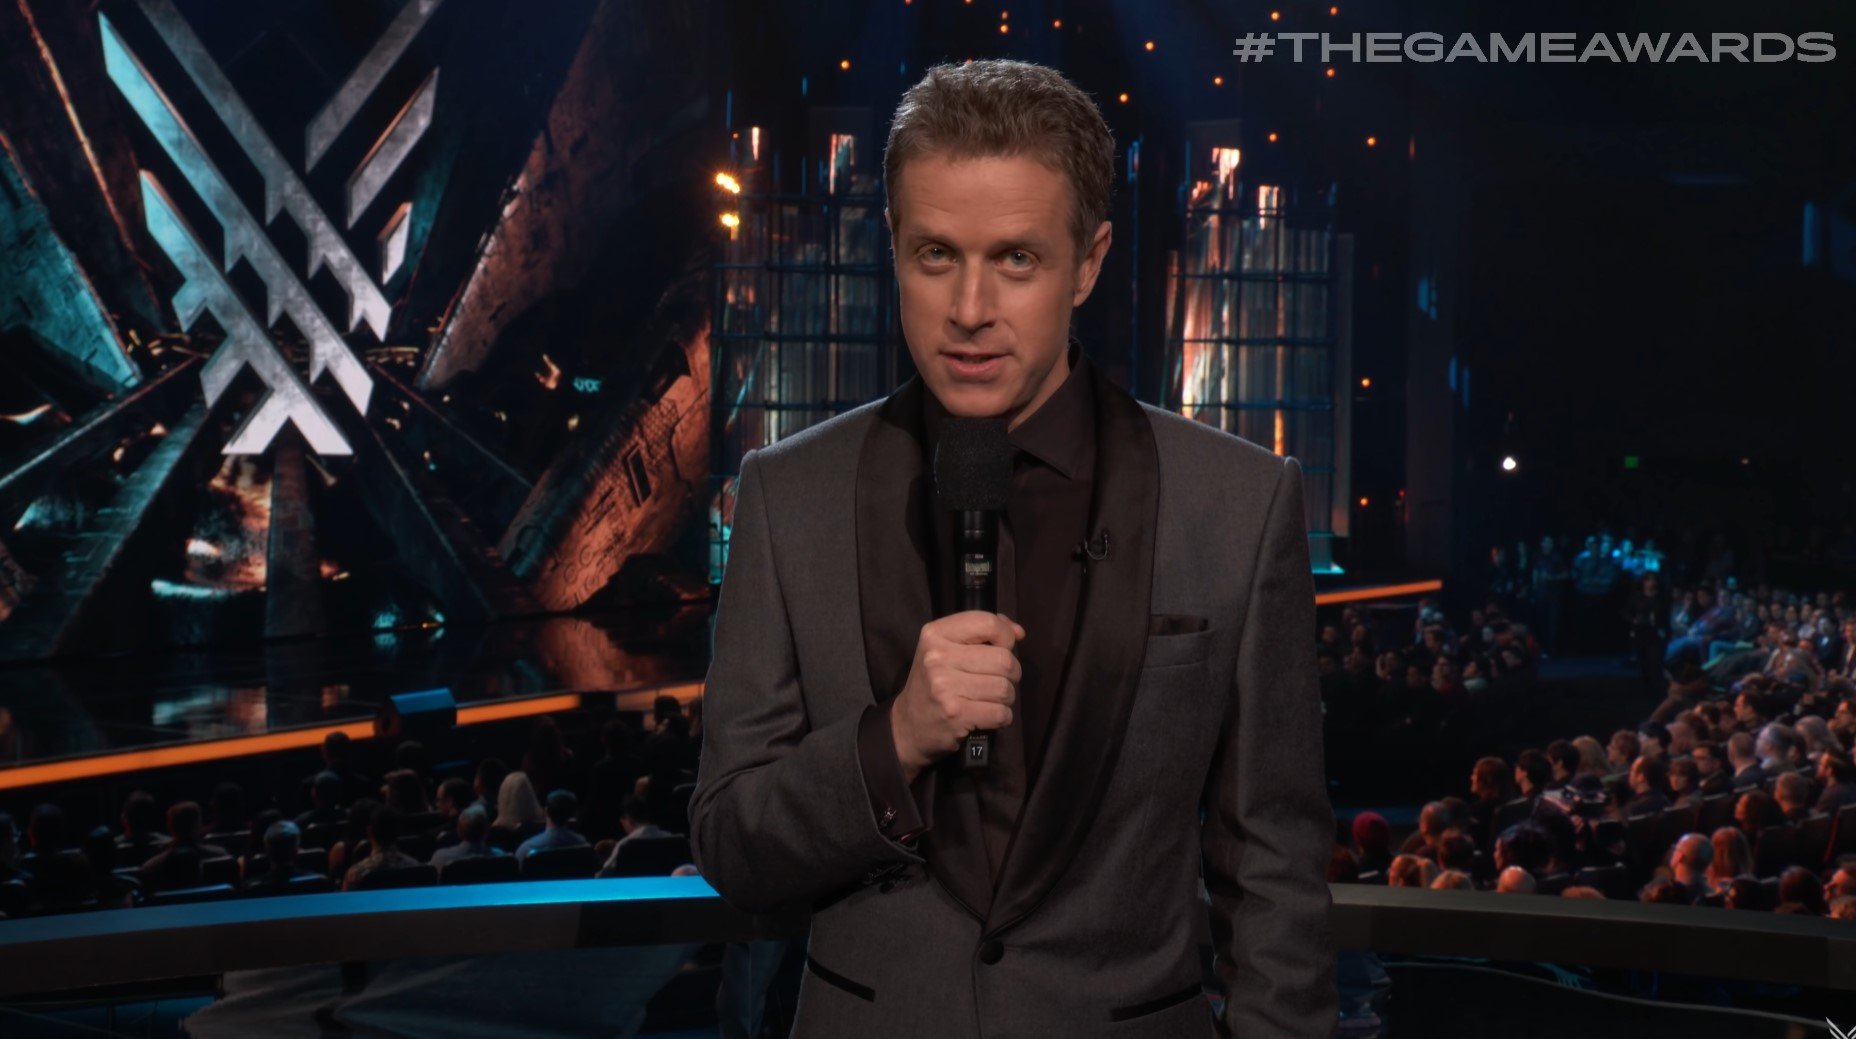 The Game Awards 2022 will be significantly shorter than last year